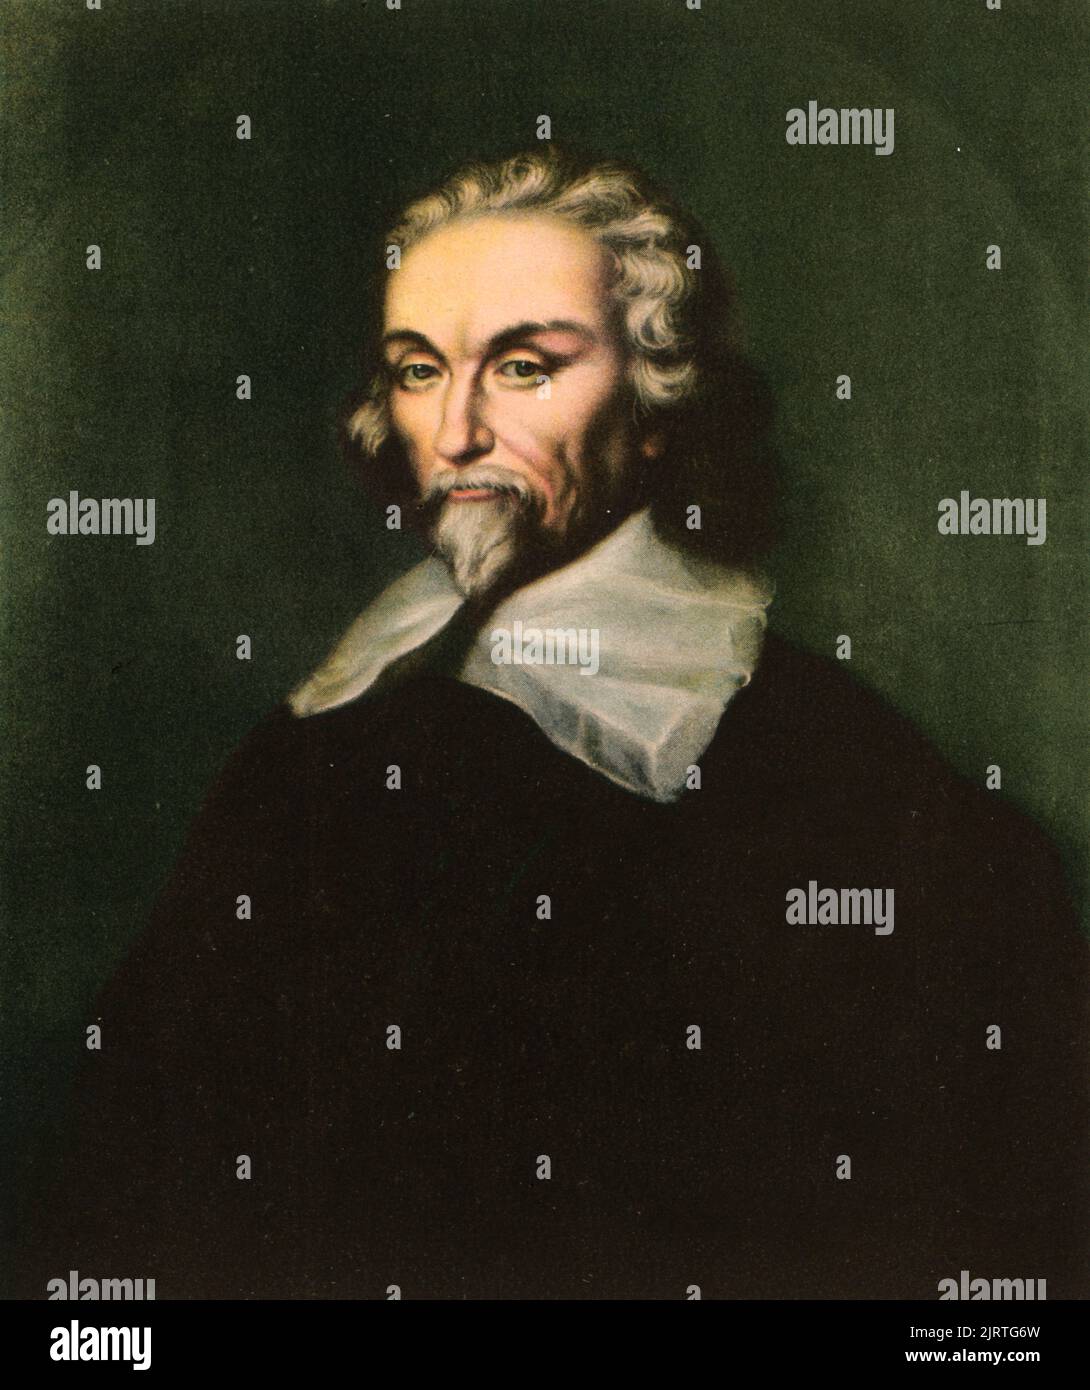 William Harvey (1578-1657), c17th century. English physician who made influential contributions in anatomy and physiology. Stock Photo